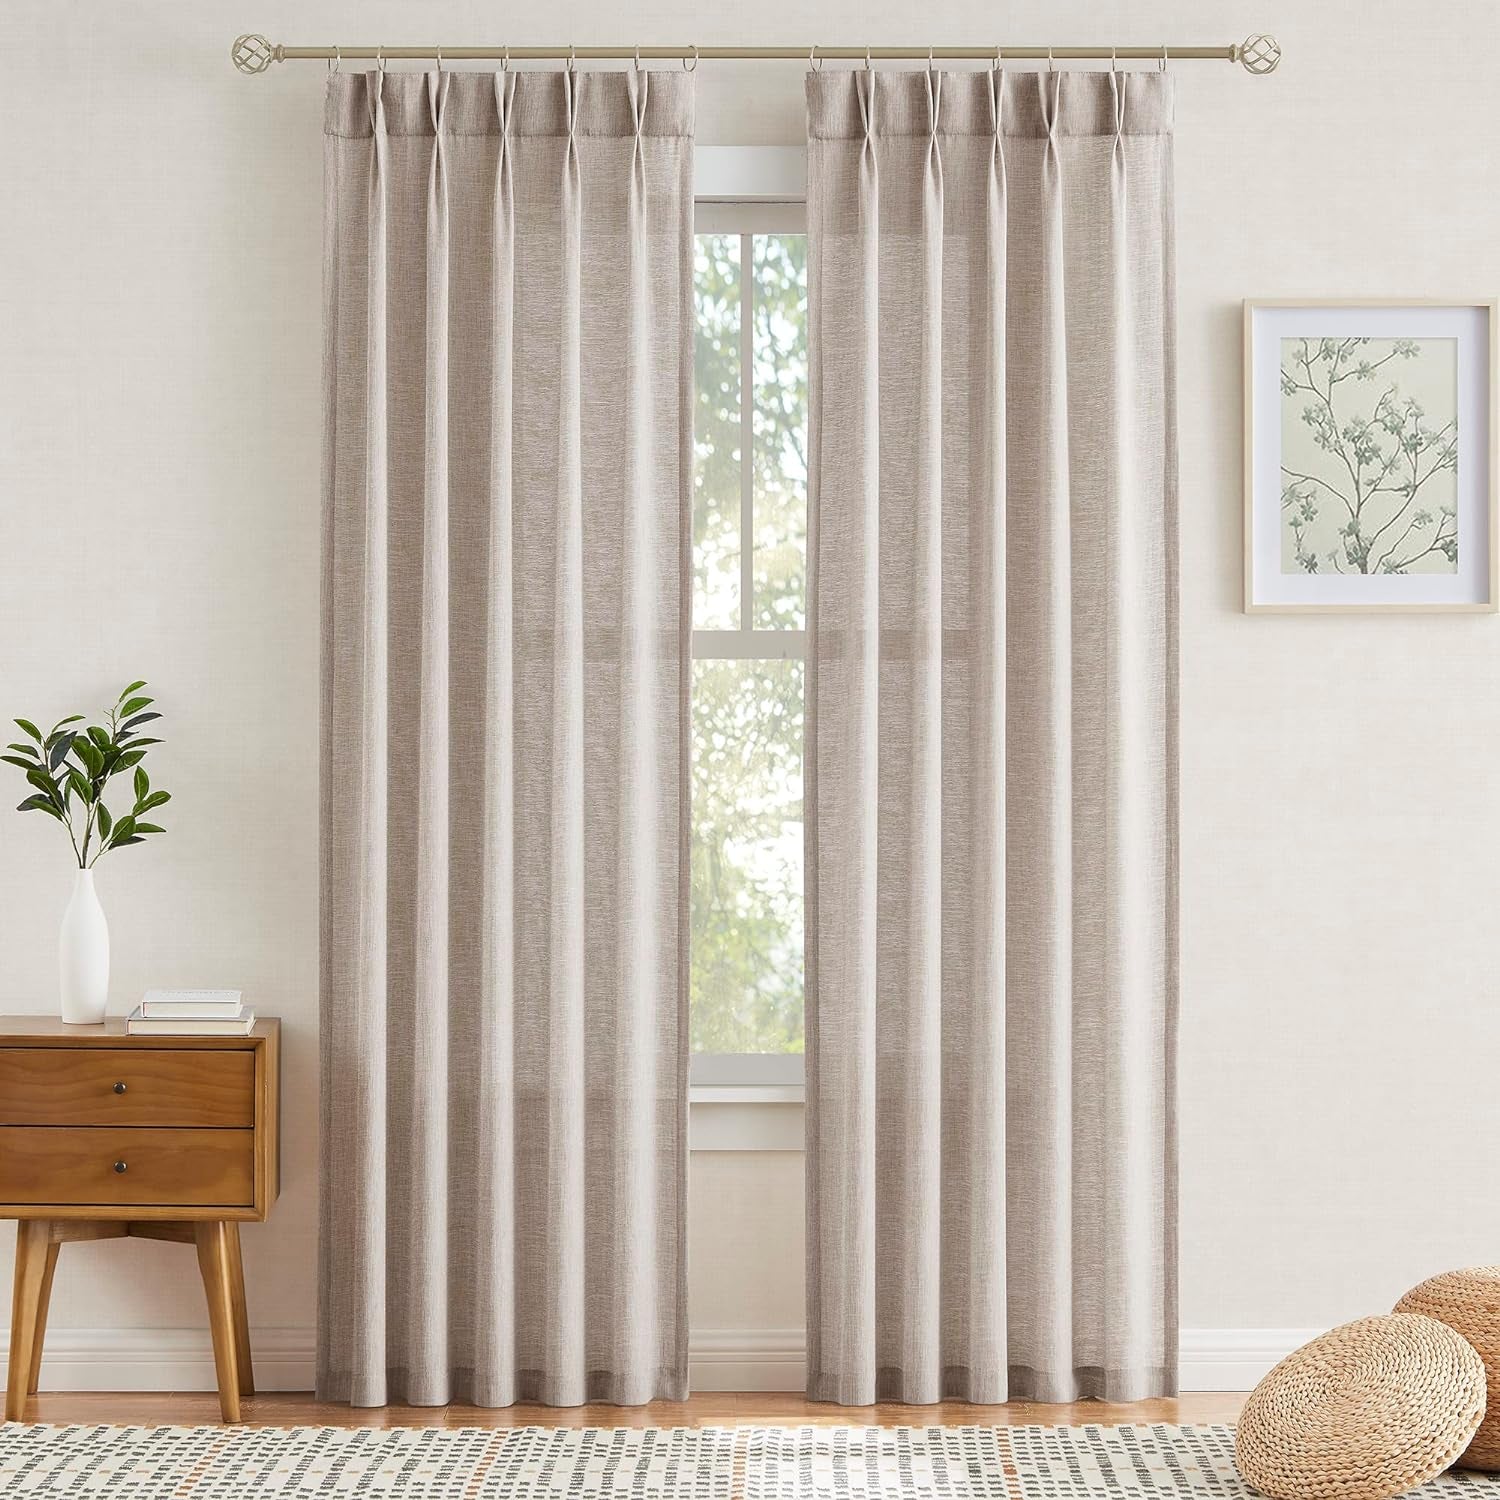 Enactex Linen Textured Pinch Pleat 25 X 84 Inch Semi Sheer Back Tab Curtains Light Filtering Drapes for Living Room Farmhouse Privacy Protect Window Treatments for Bedroom Patio Door 2 Panels, Tan  Enactex   